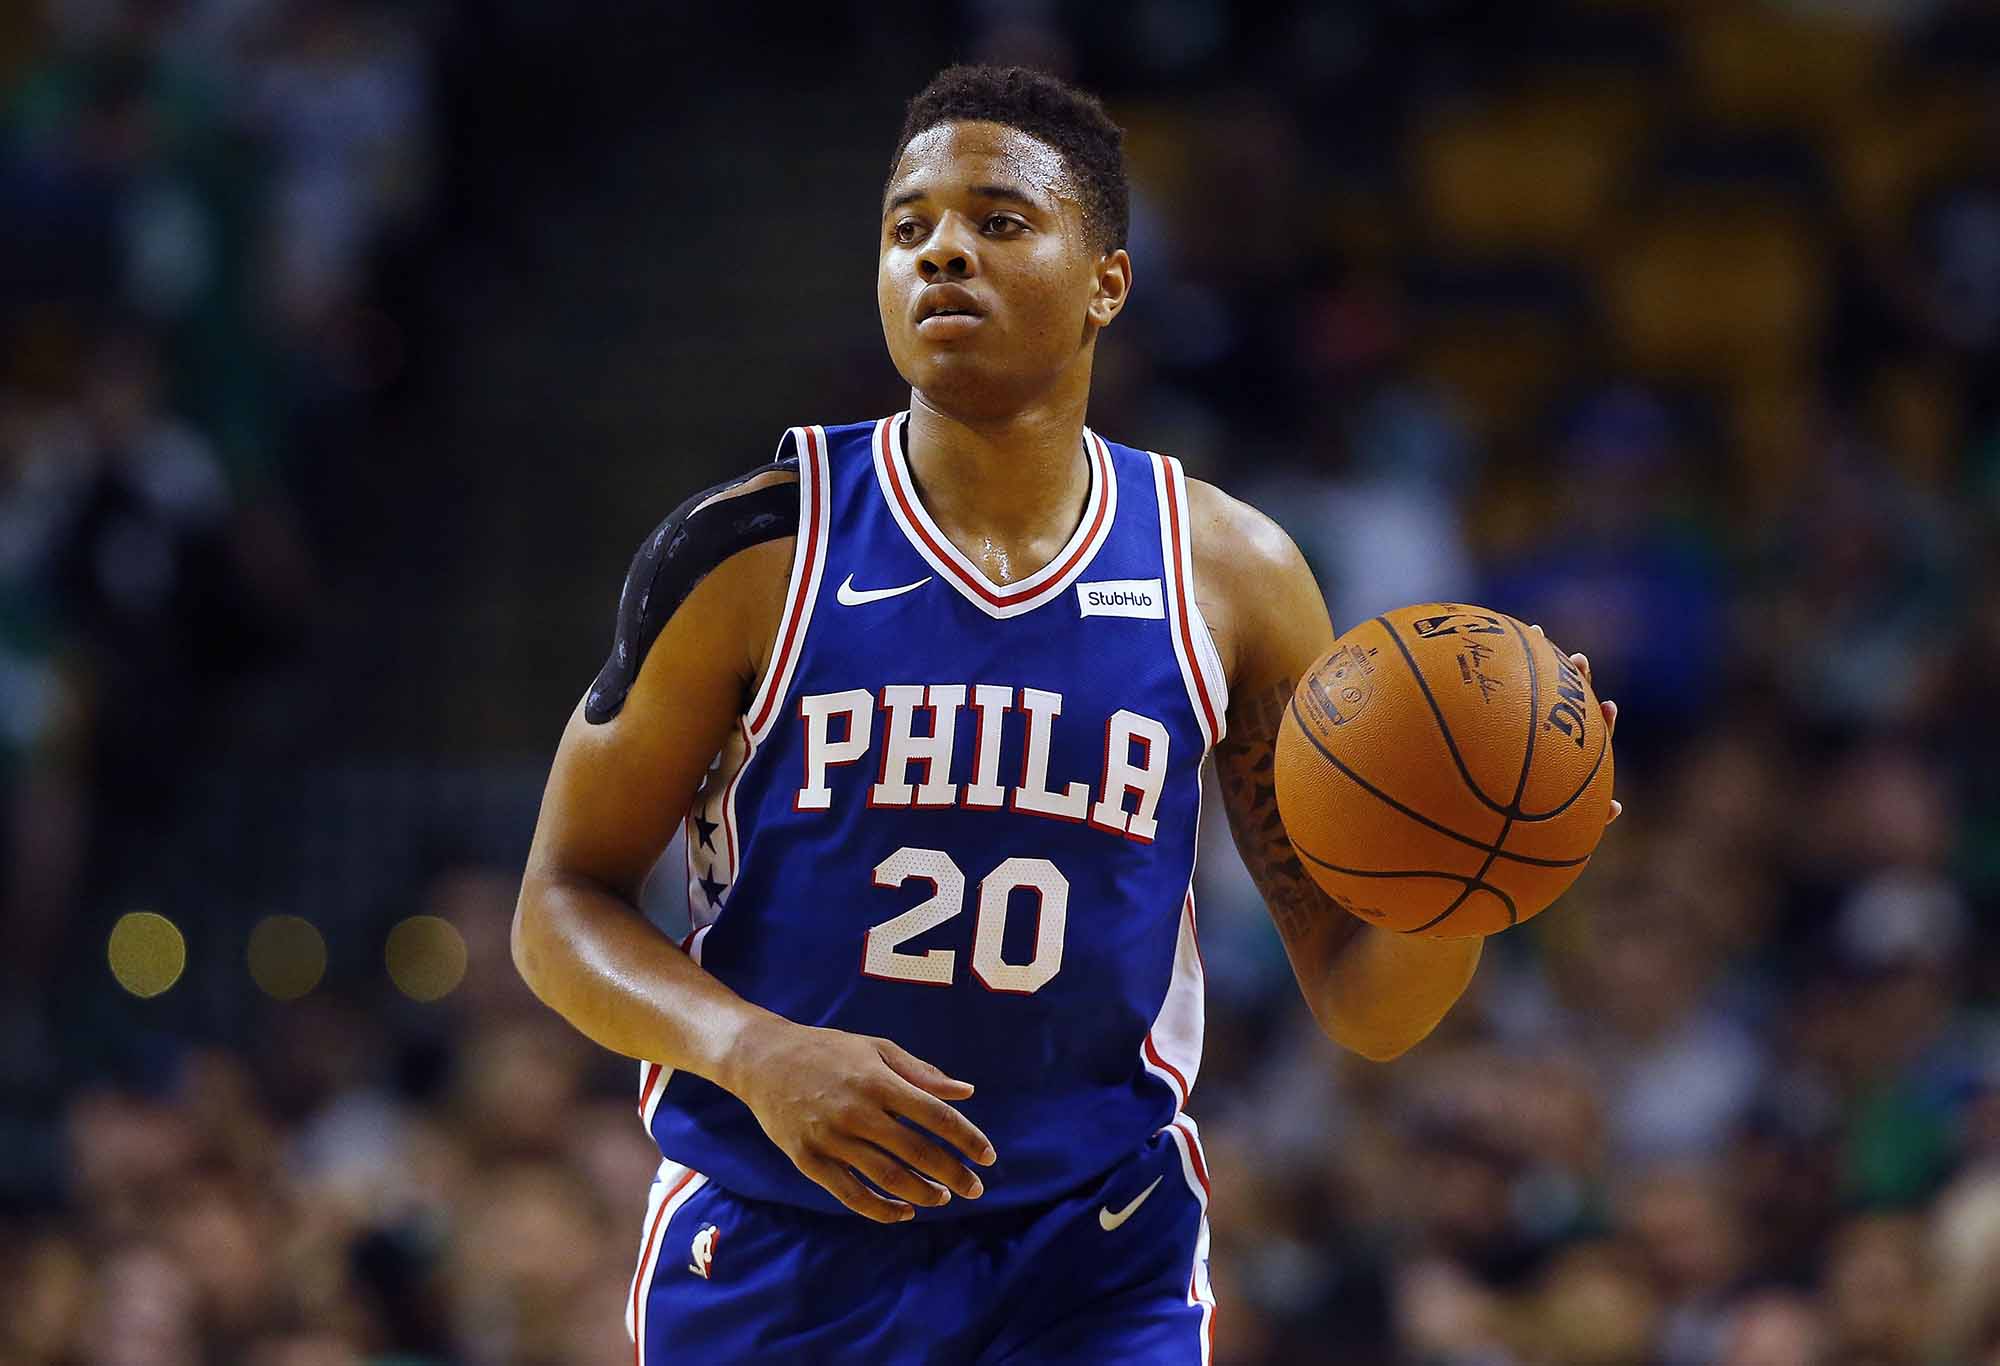 Markelle Fultz for the 76ers